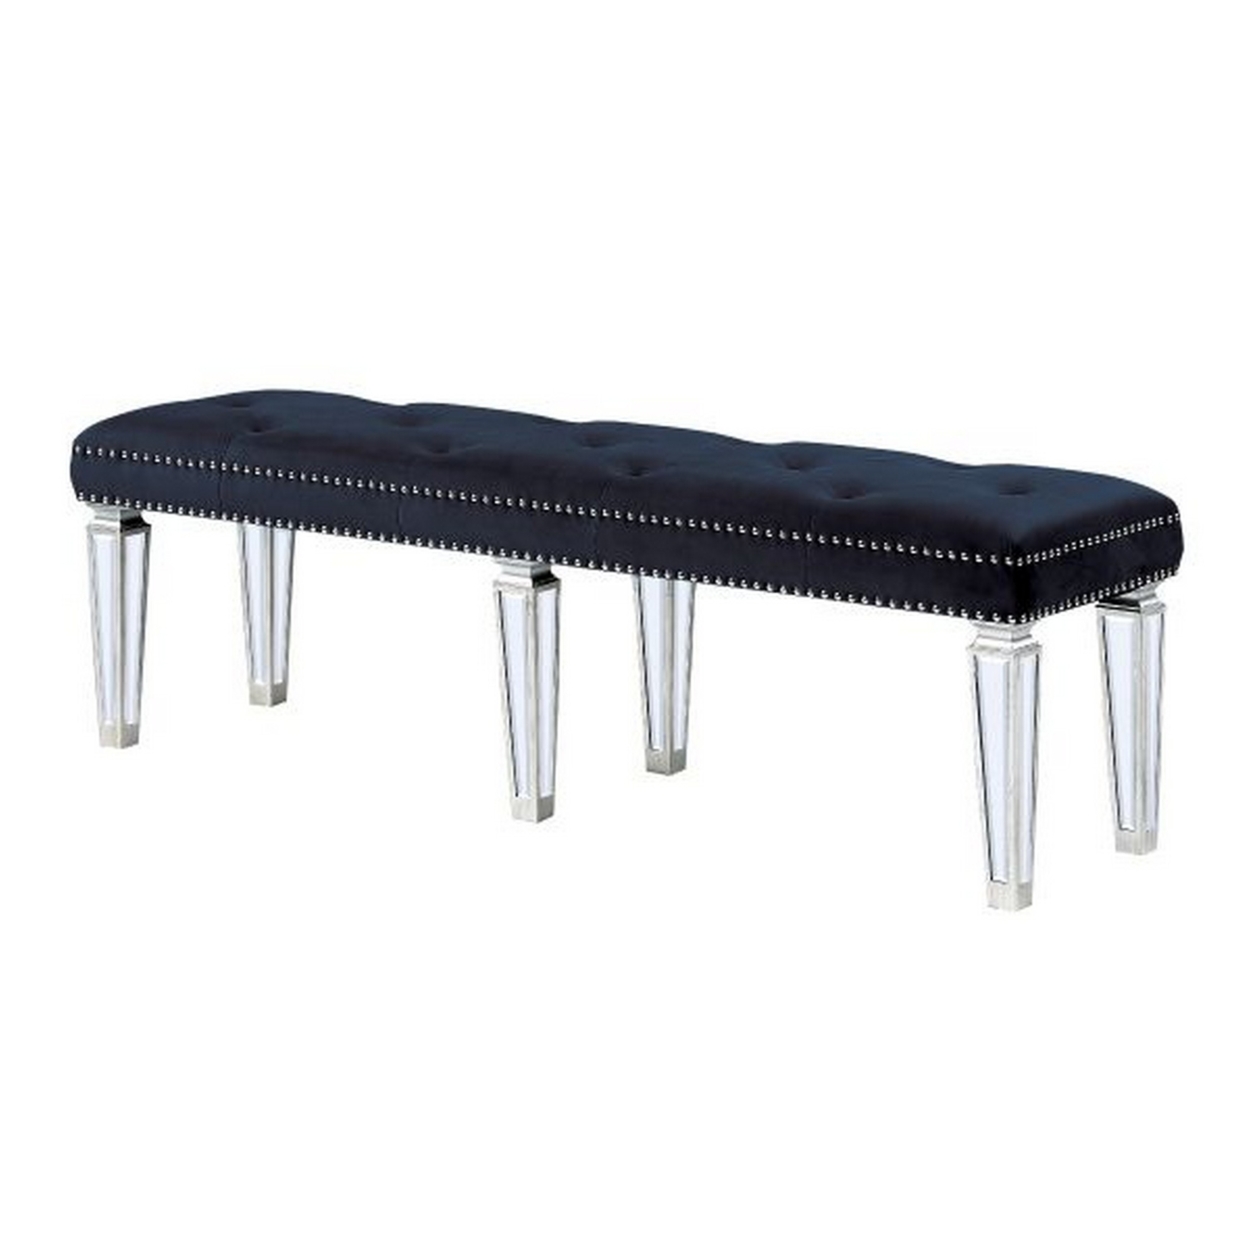 Accent Bench With Tufted Velvet Seat And Mirrored Legs, Black- Saltoro Sherpi